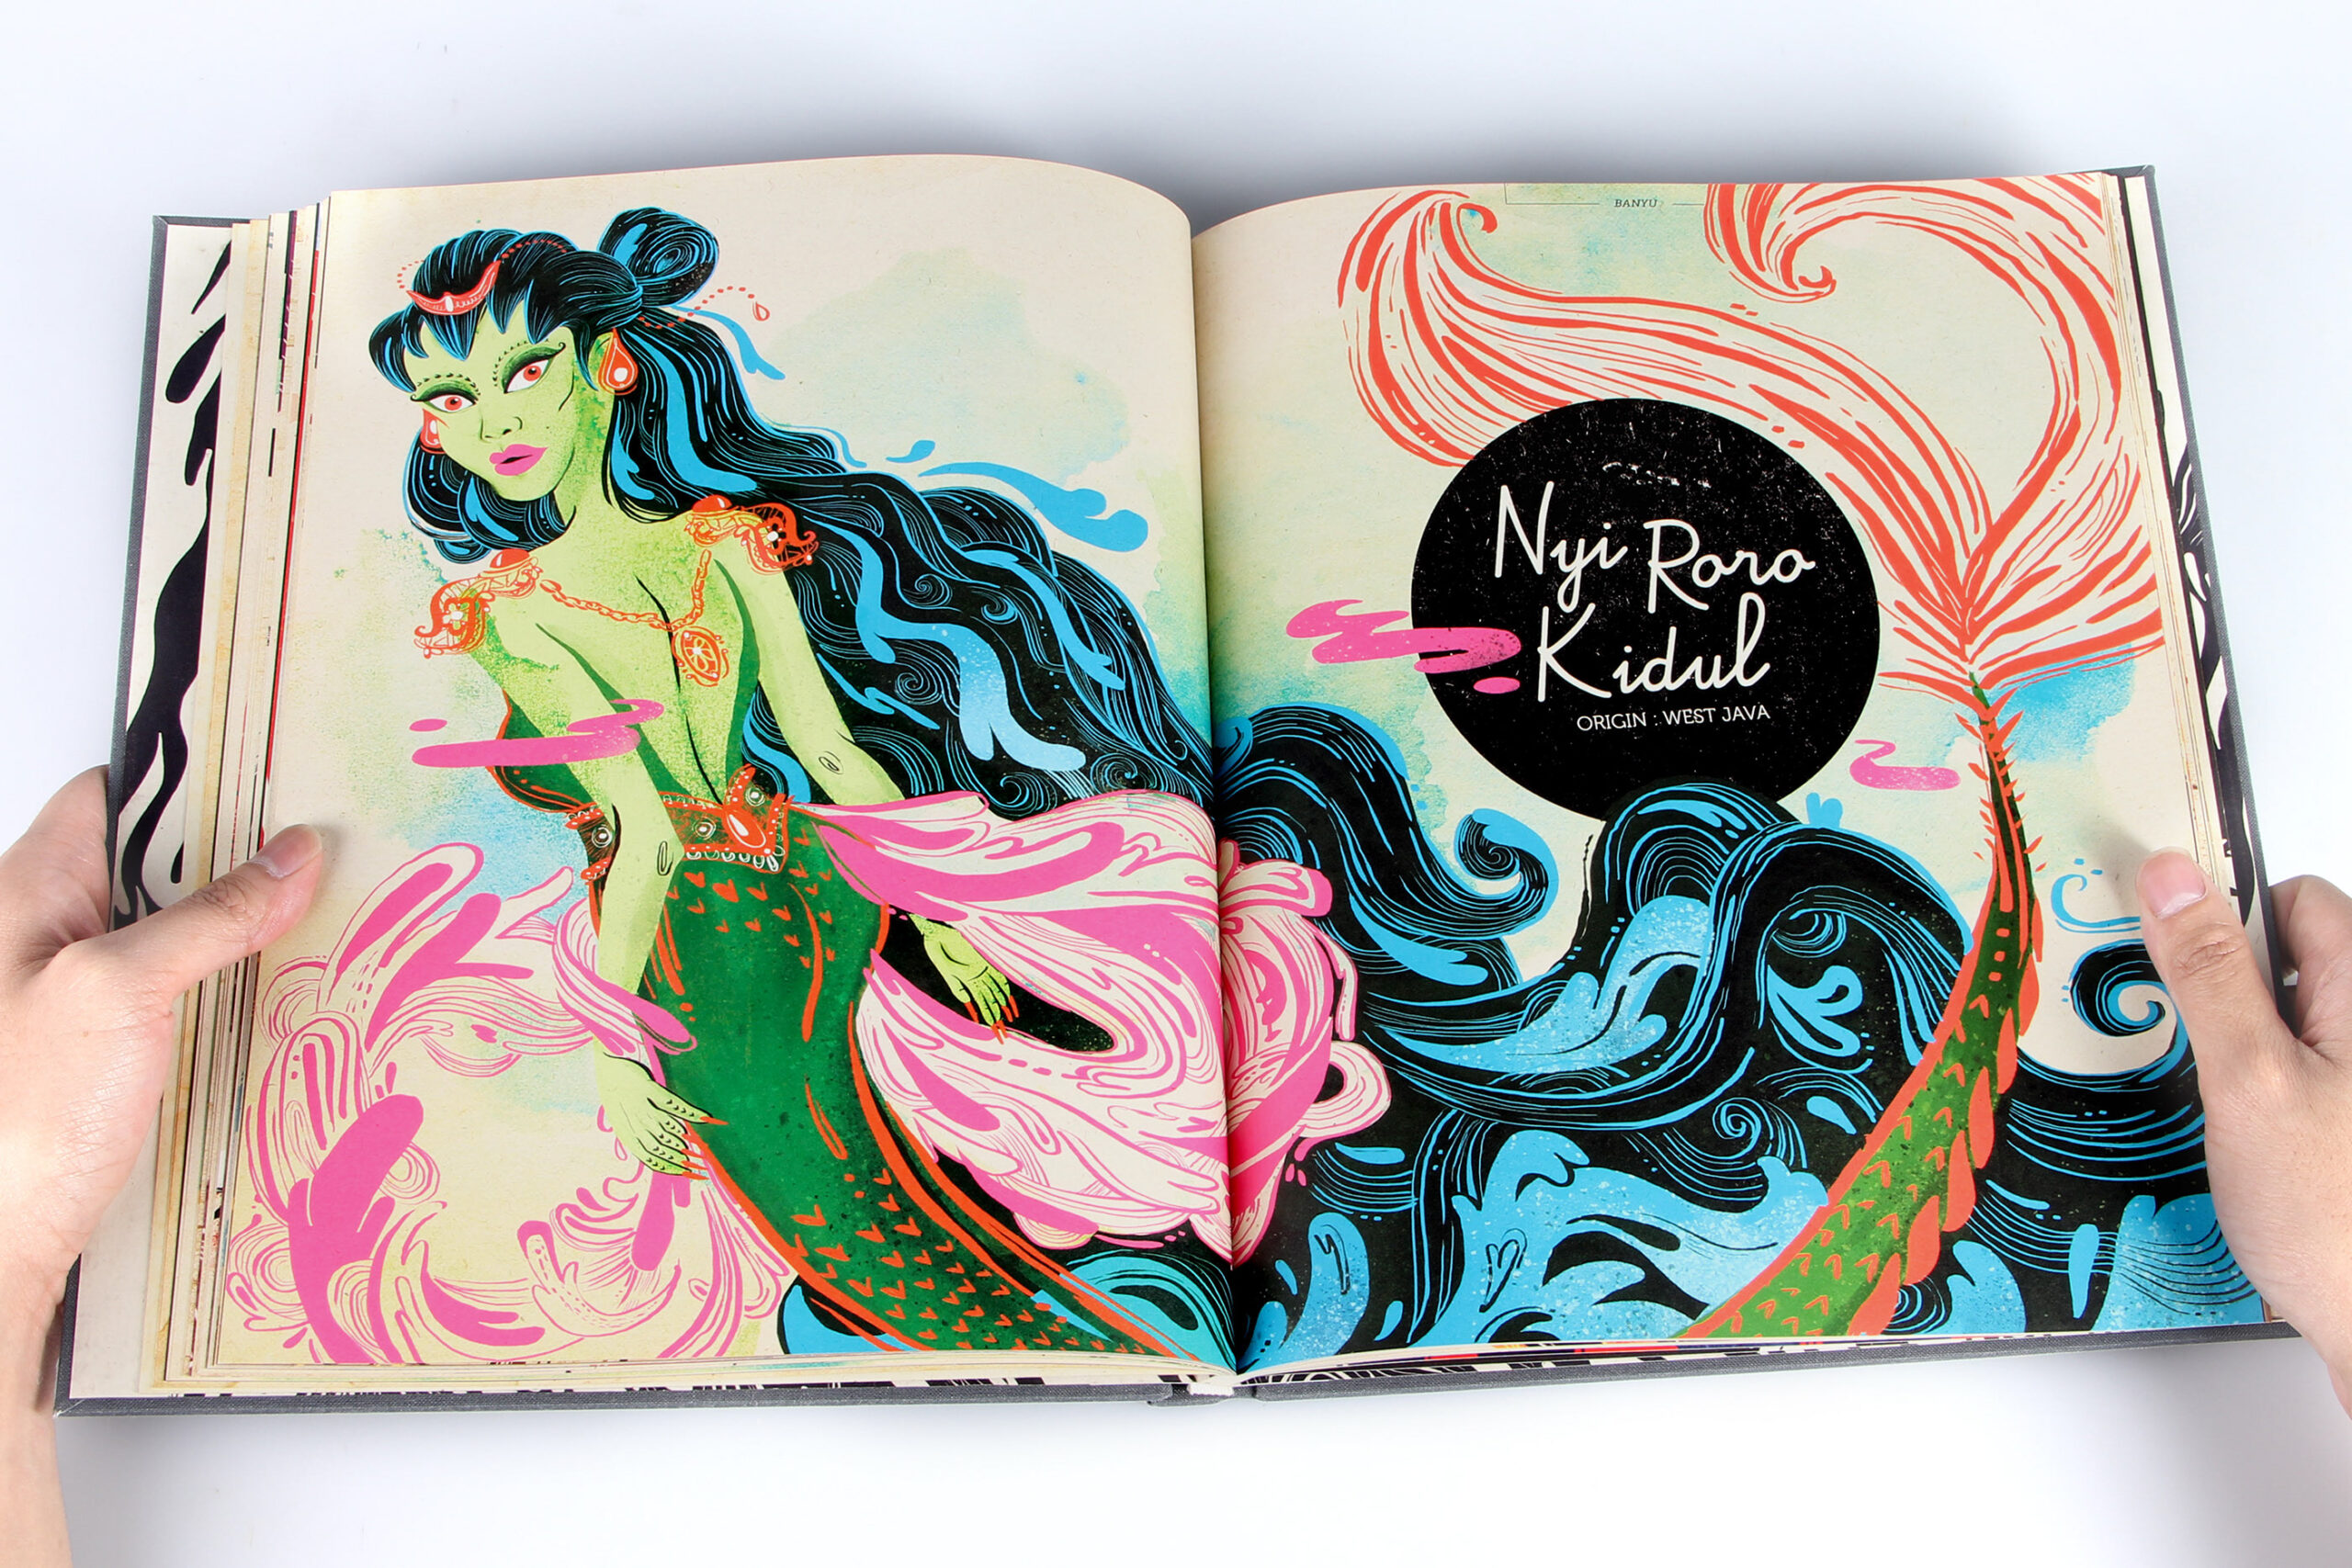 An illustration of Nyi Roro Kidul, a mythical Javanese mermaid, with green skin, long black hair, and a fish-like tail.